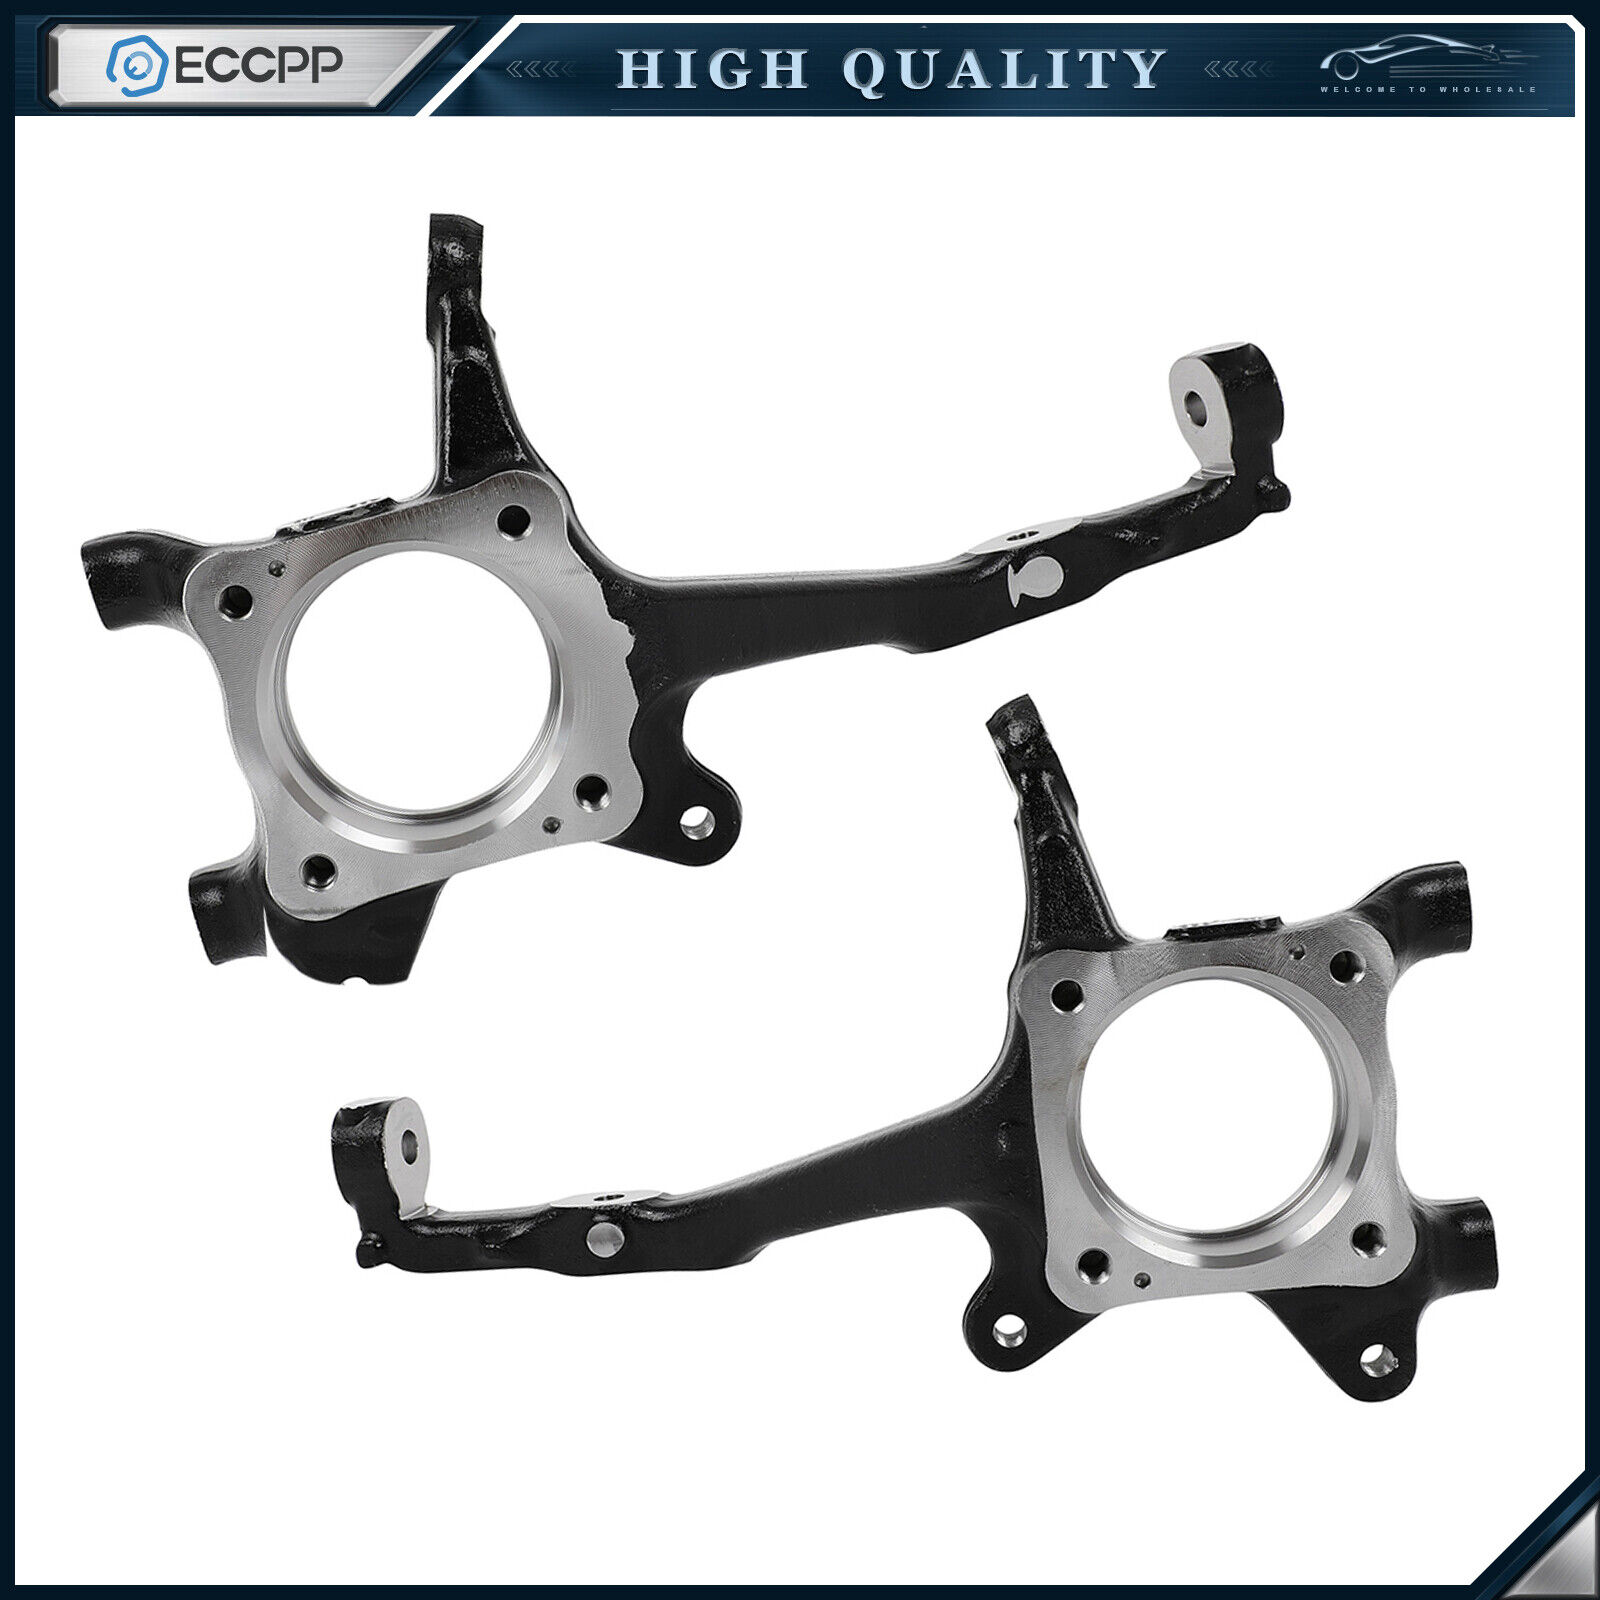 ECCPP 2X Front Left & Right Steering Knuckle For Toyota Tacoma 2005-2019 4WD